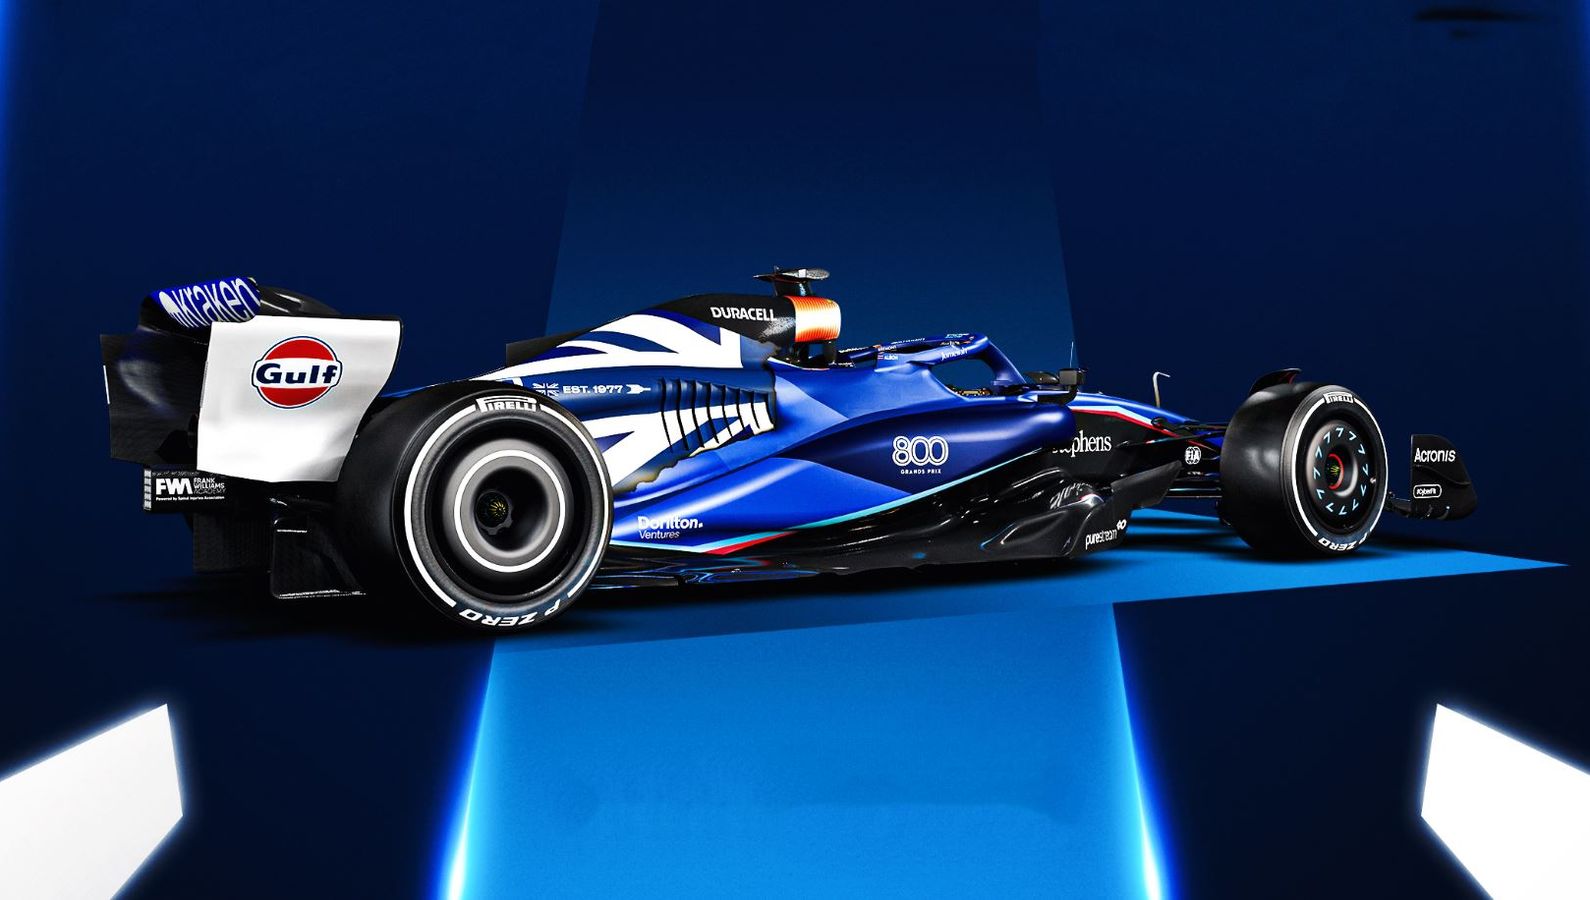 Williams' special 800th race livery